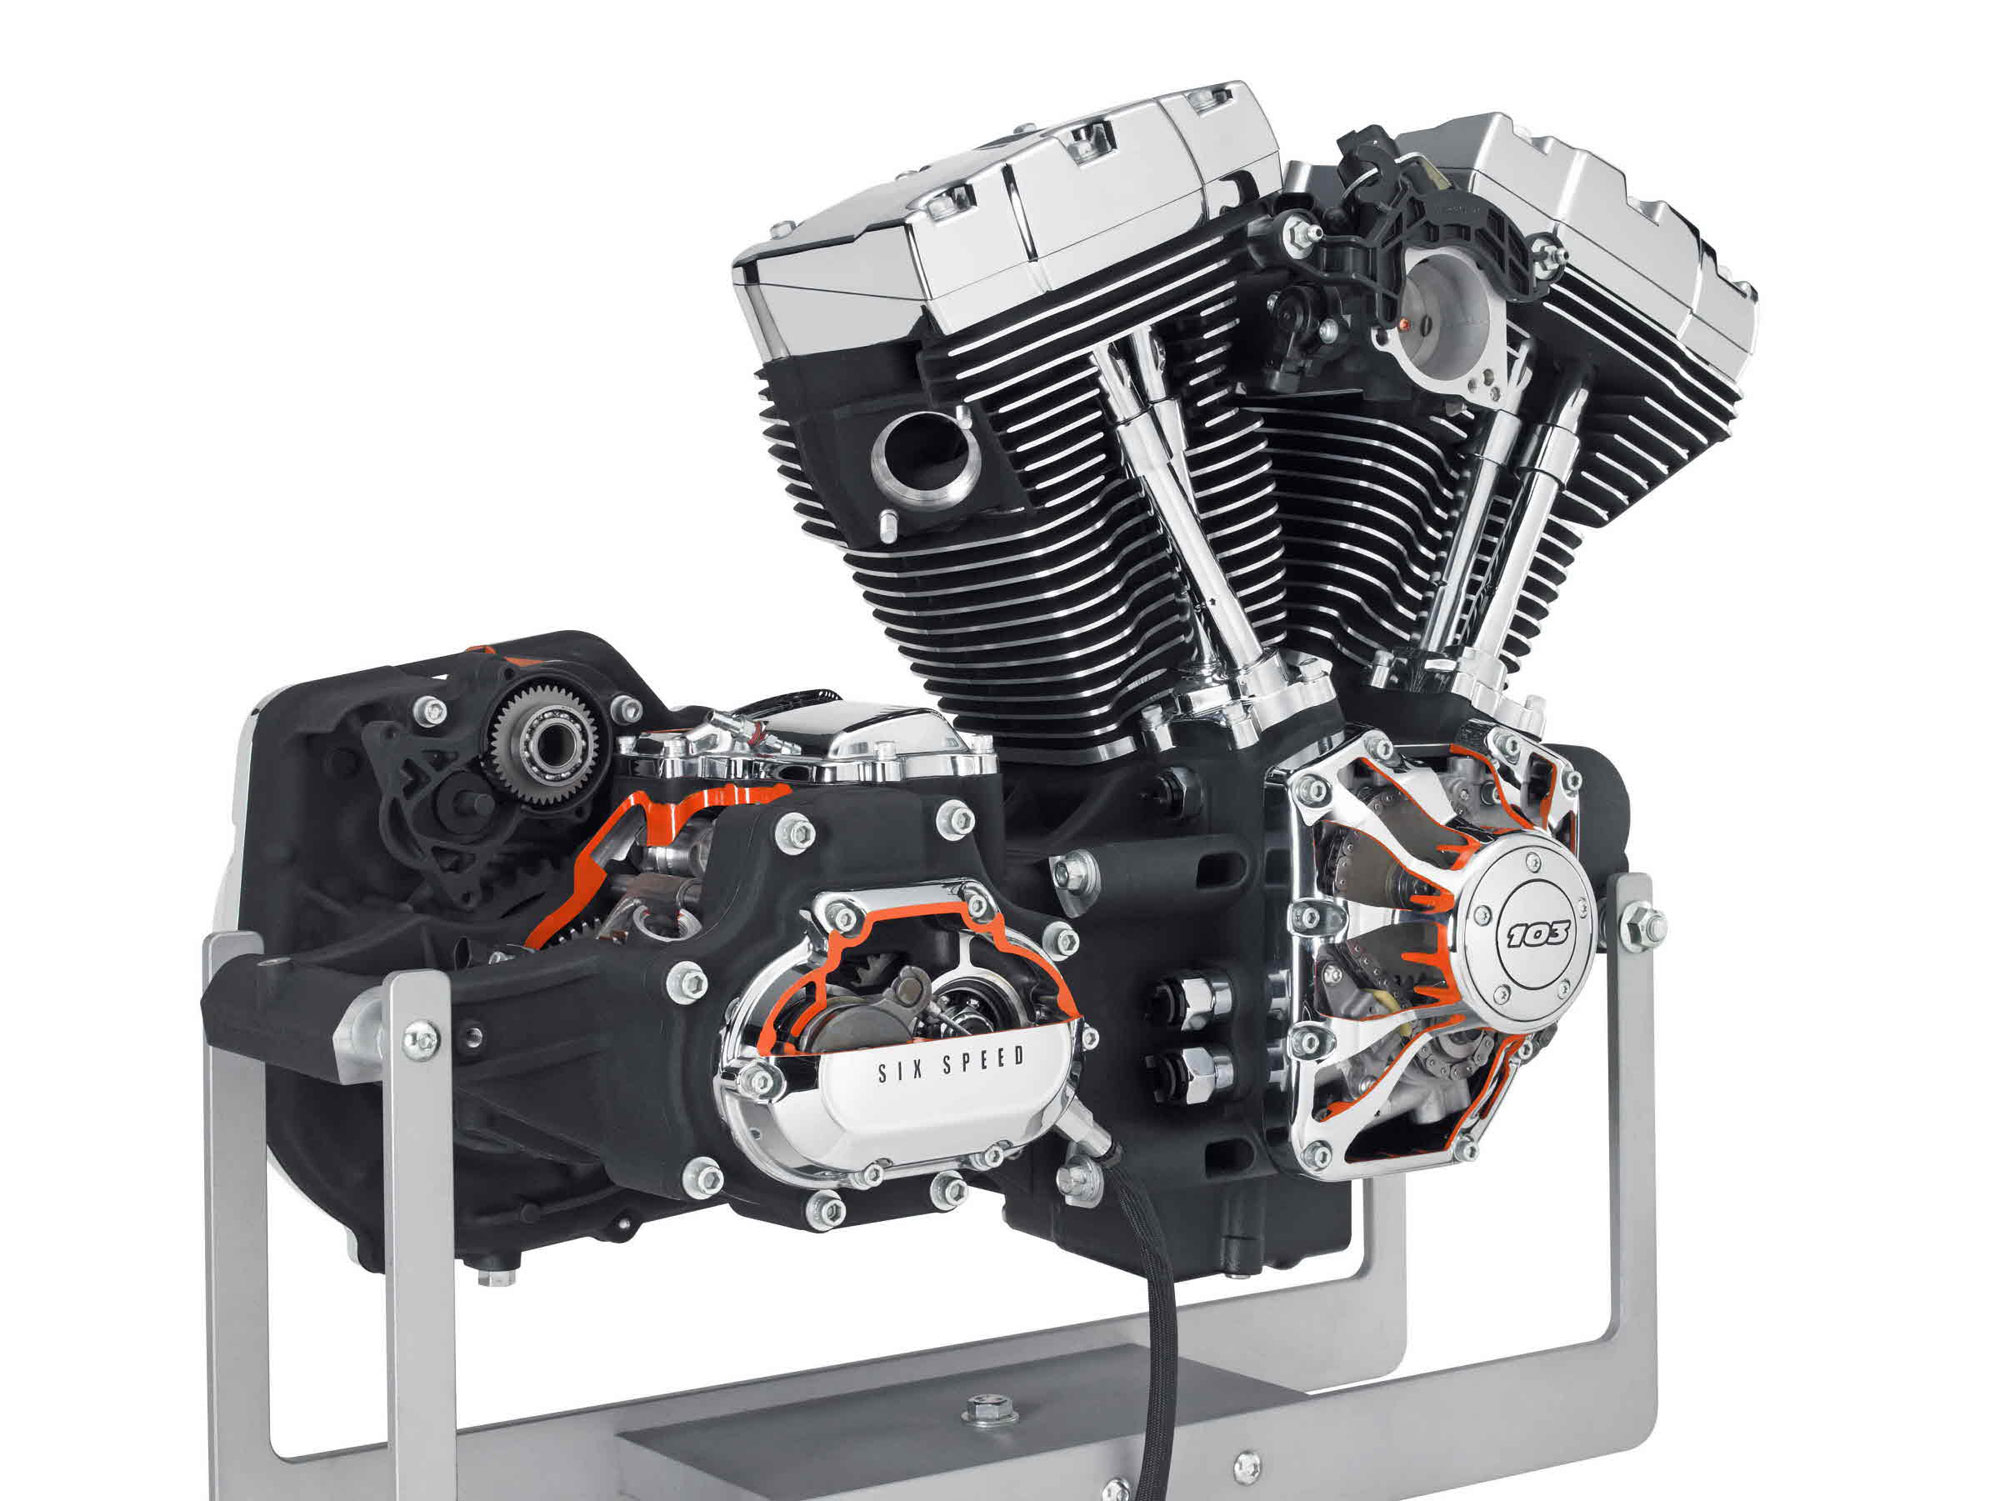 2012 Harley Davidson Twin Cam 103 V Twin Engine Review